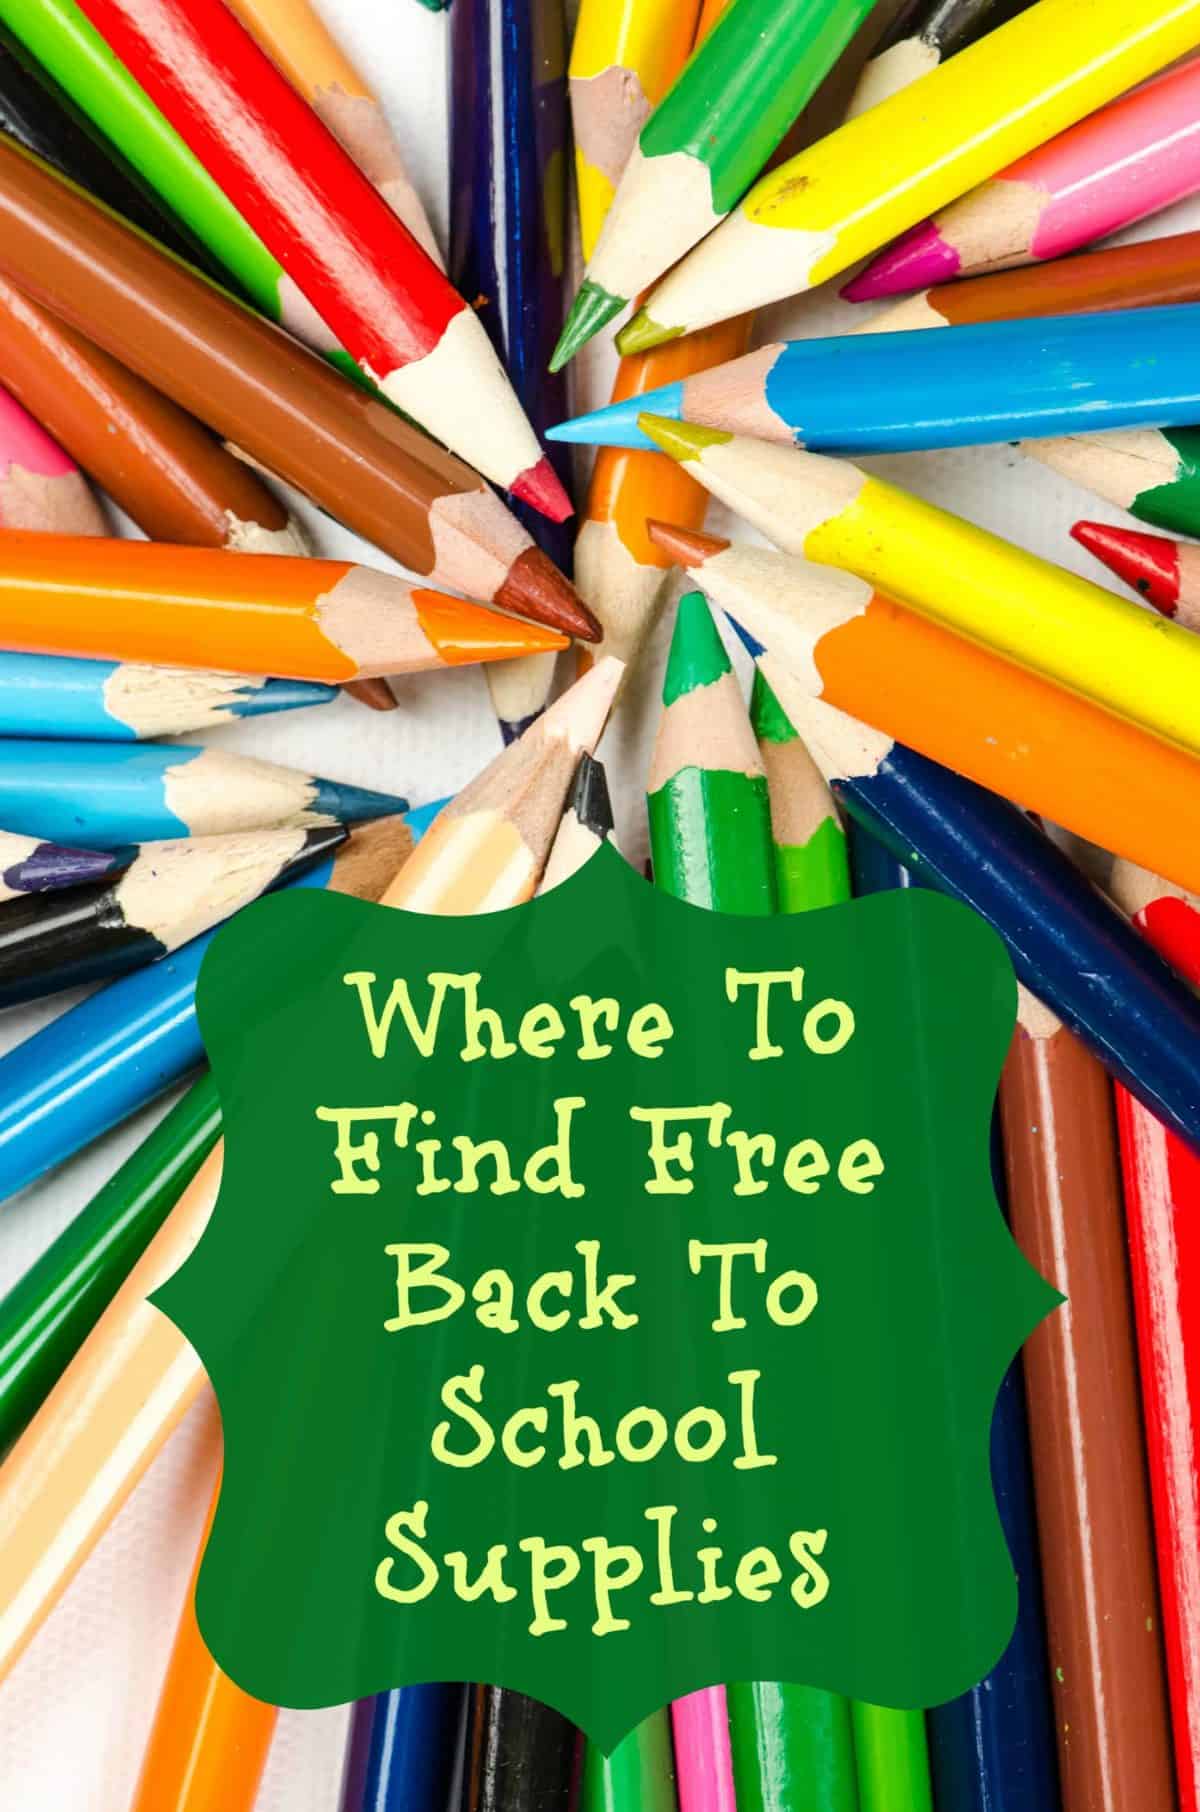 Where To Find Free Back To School Supplies